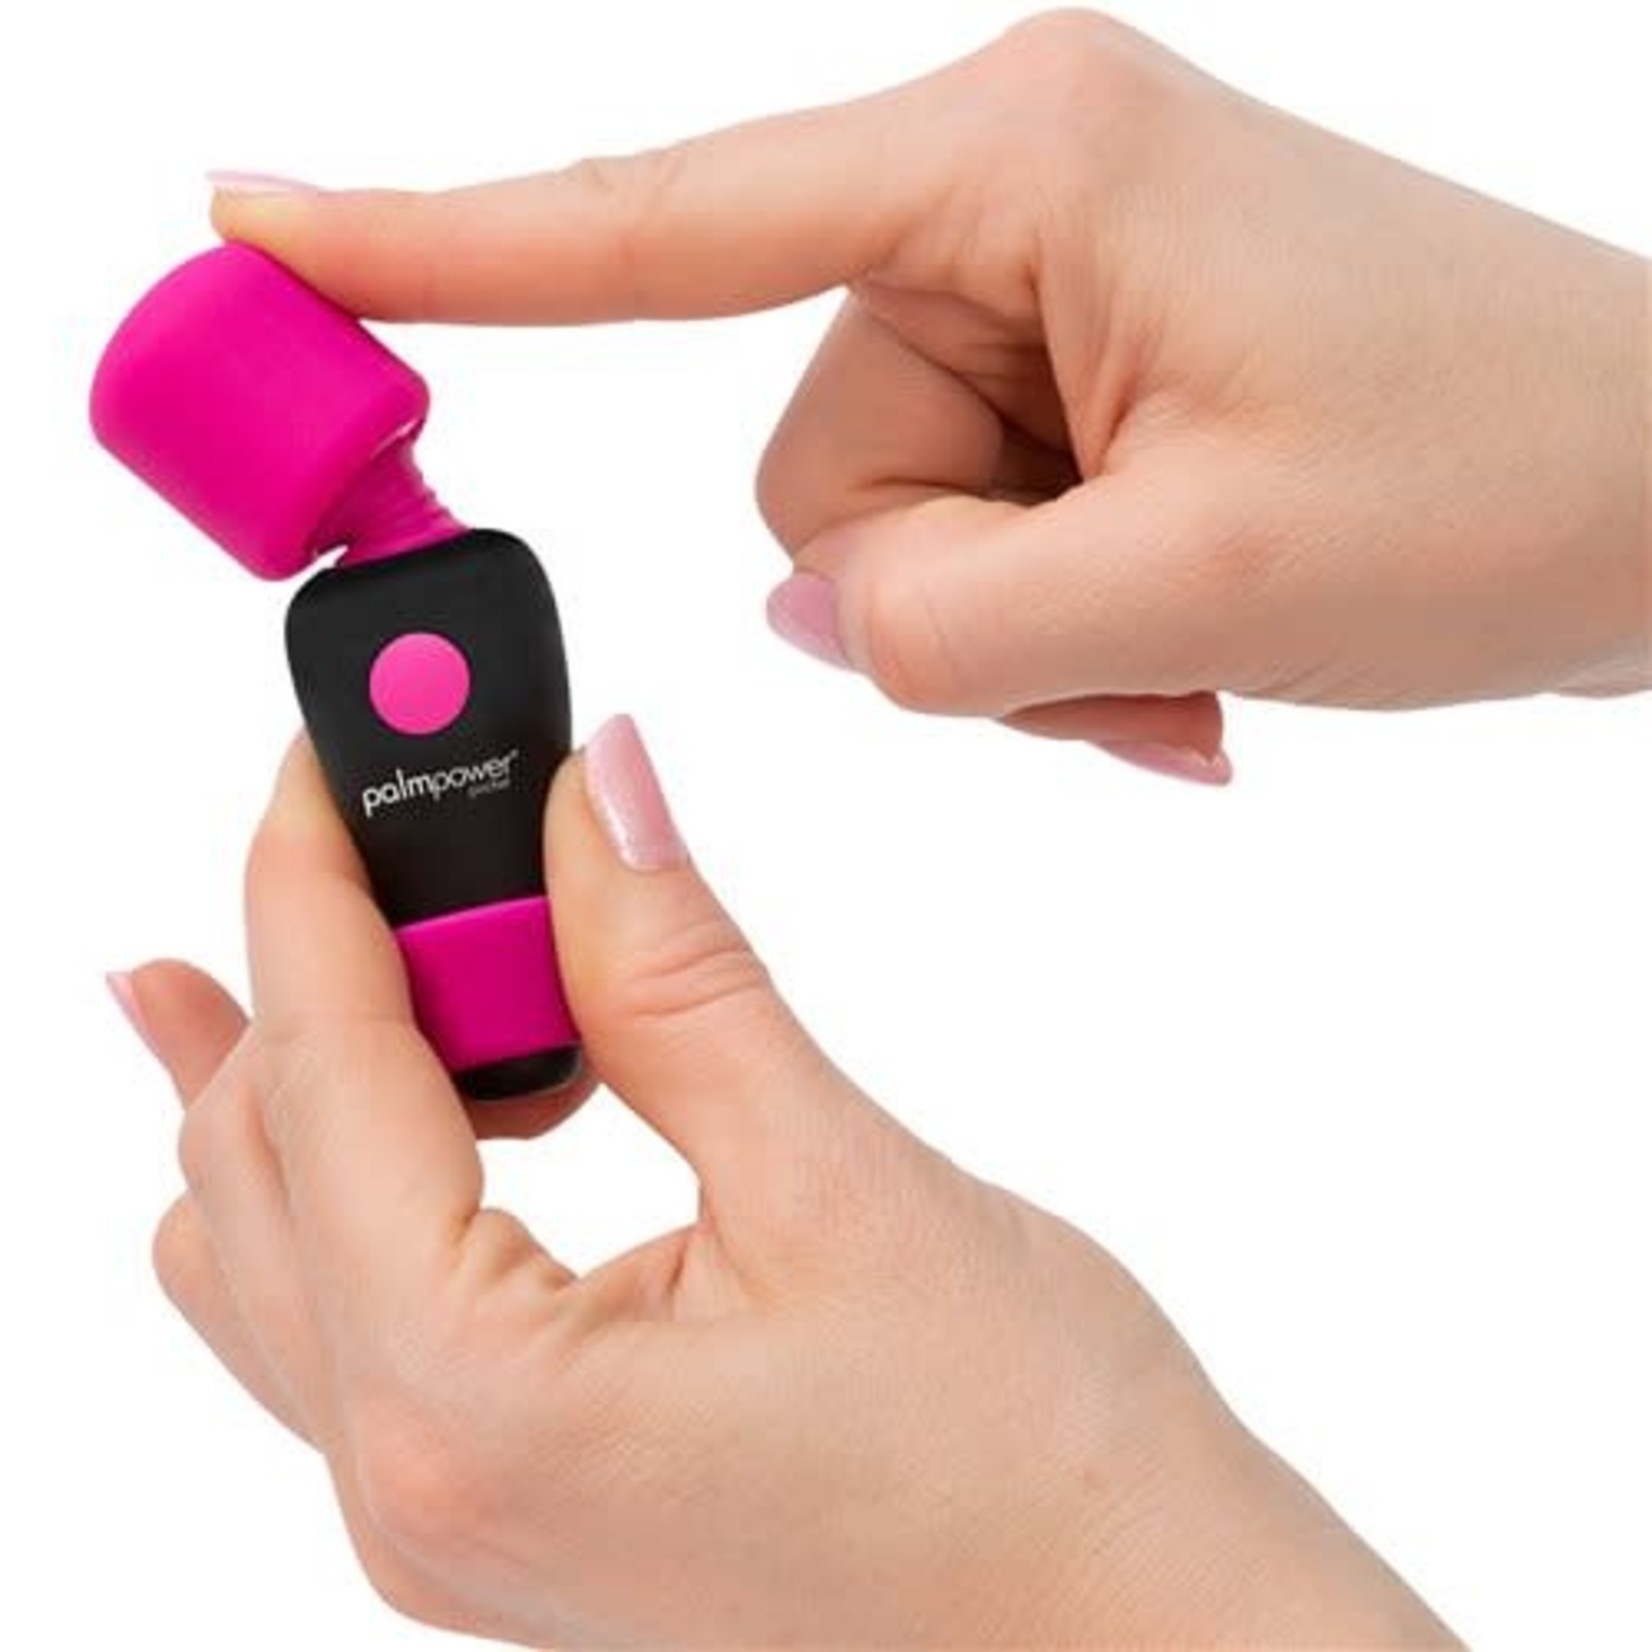 PALMPOWER POCKET - RECHARGEABLE MINI MASSAGER